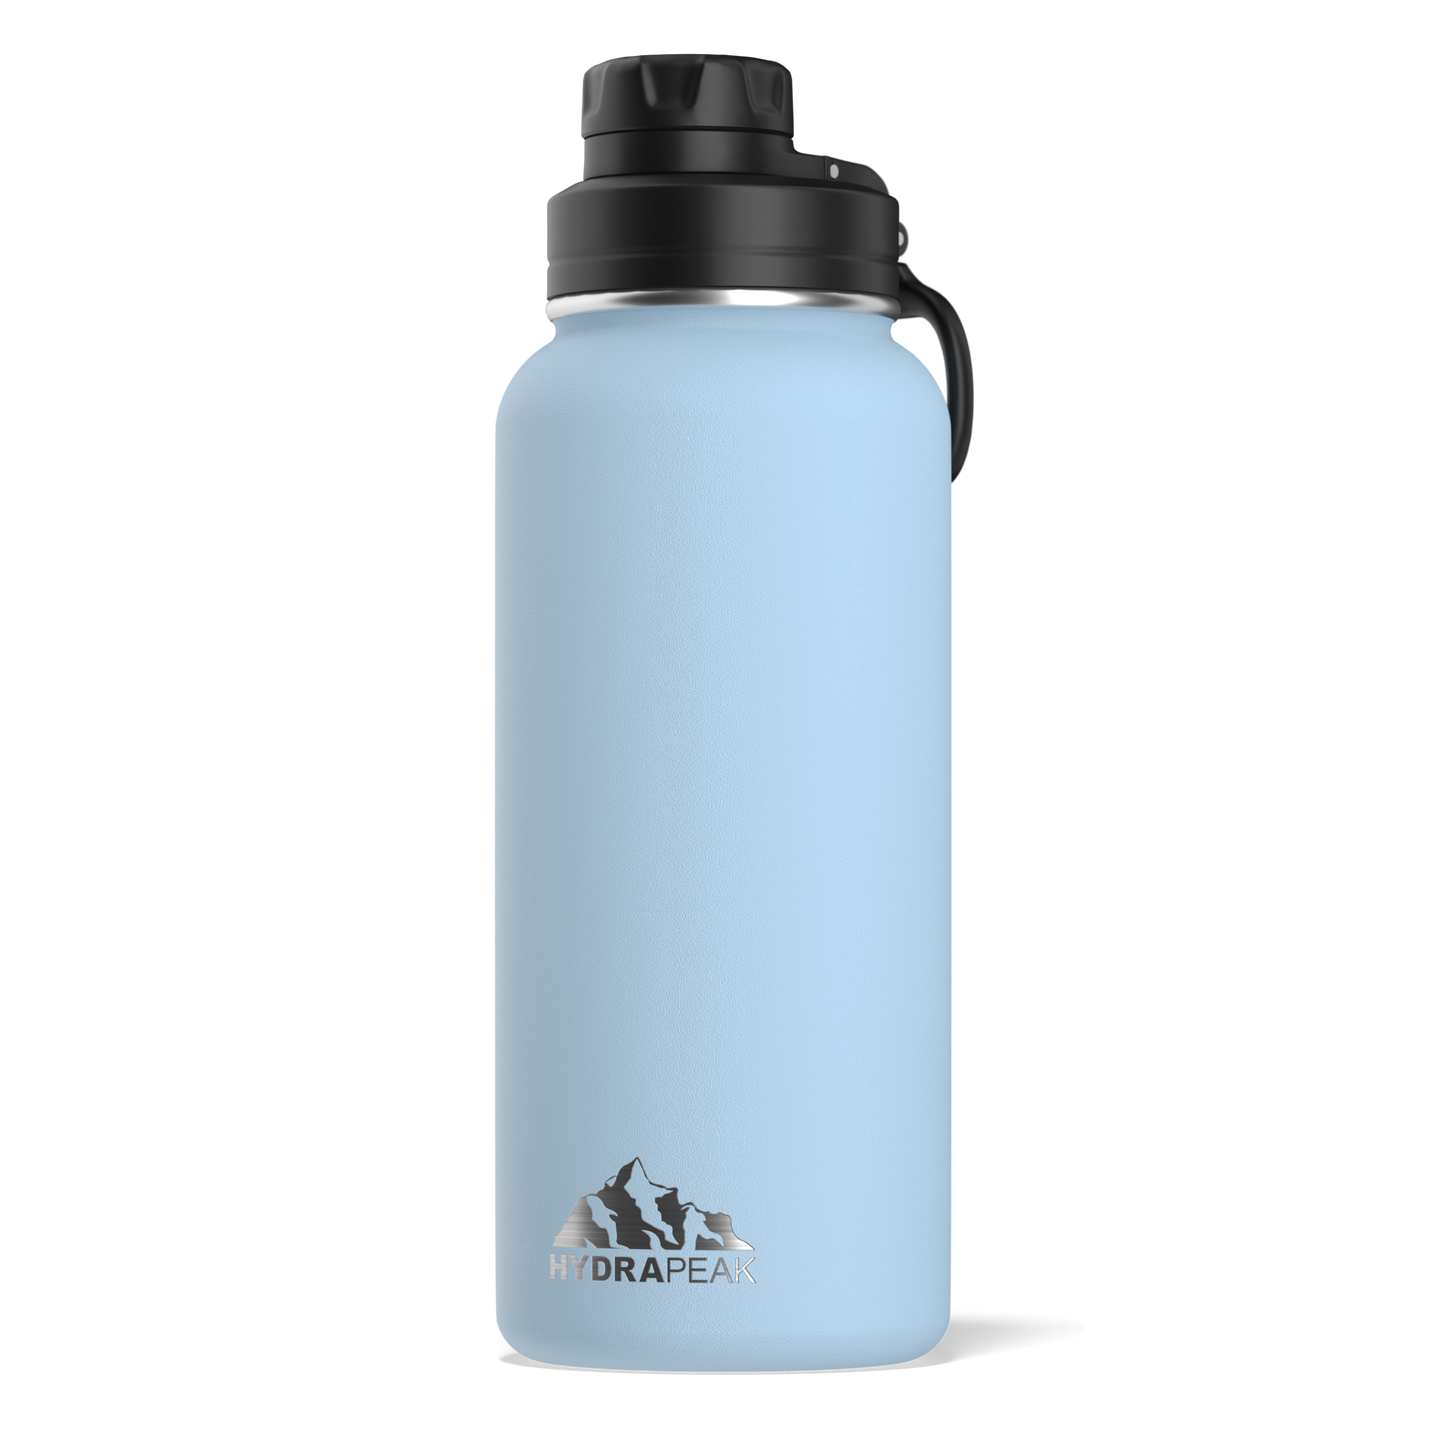 32oz Stainless Steel Insulated Water Bottle with Flexible Chug Lid - Cloud